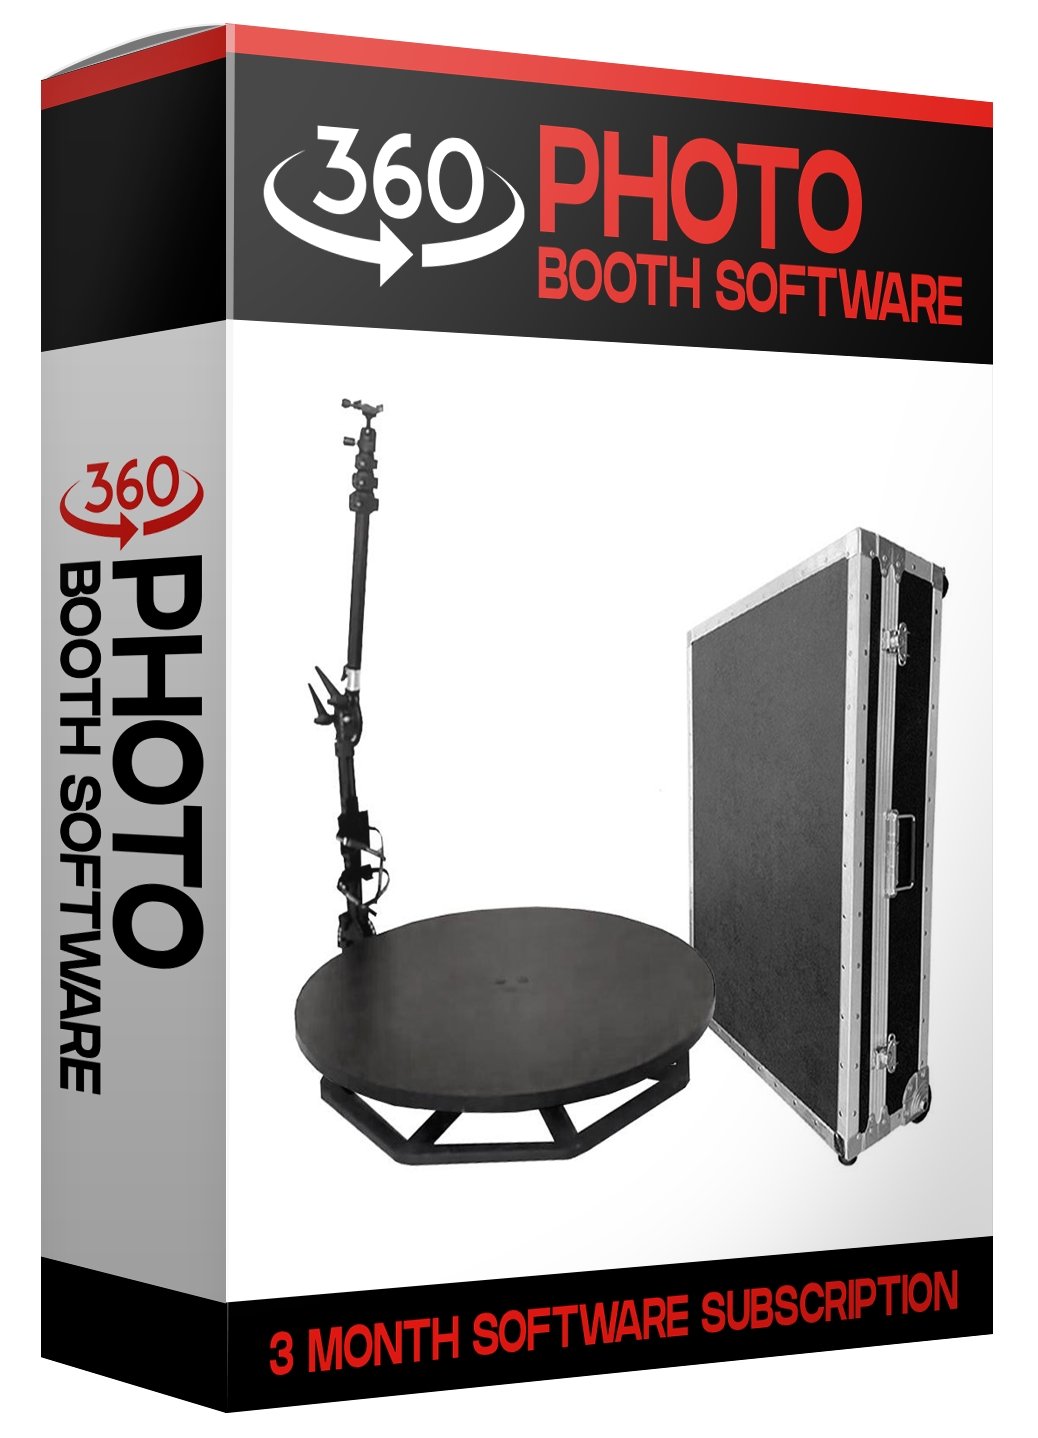 REVOSPIN OM-5 OCTAGON 360 PHOTO BOOTH PREMIUM PACKAGE (MANUAL SPIN) - VS Booths 360